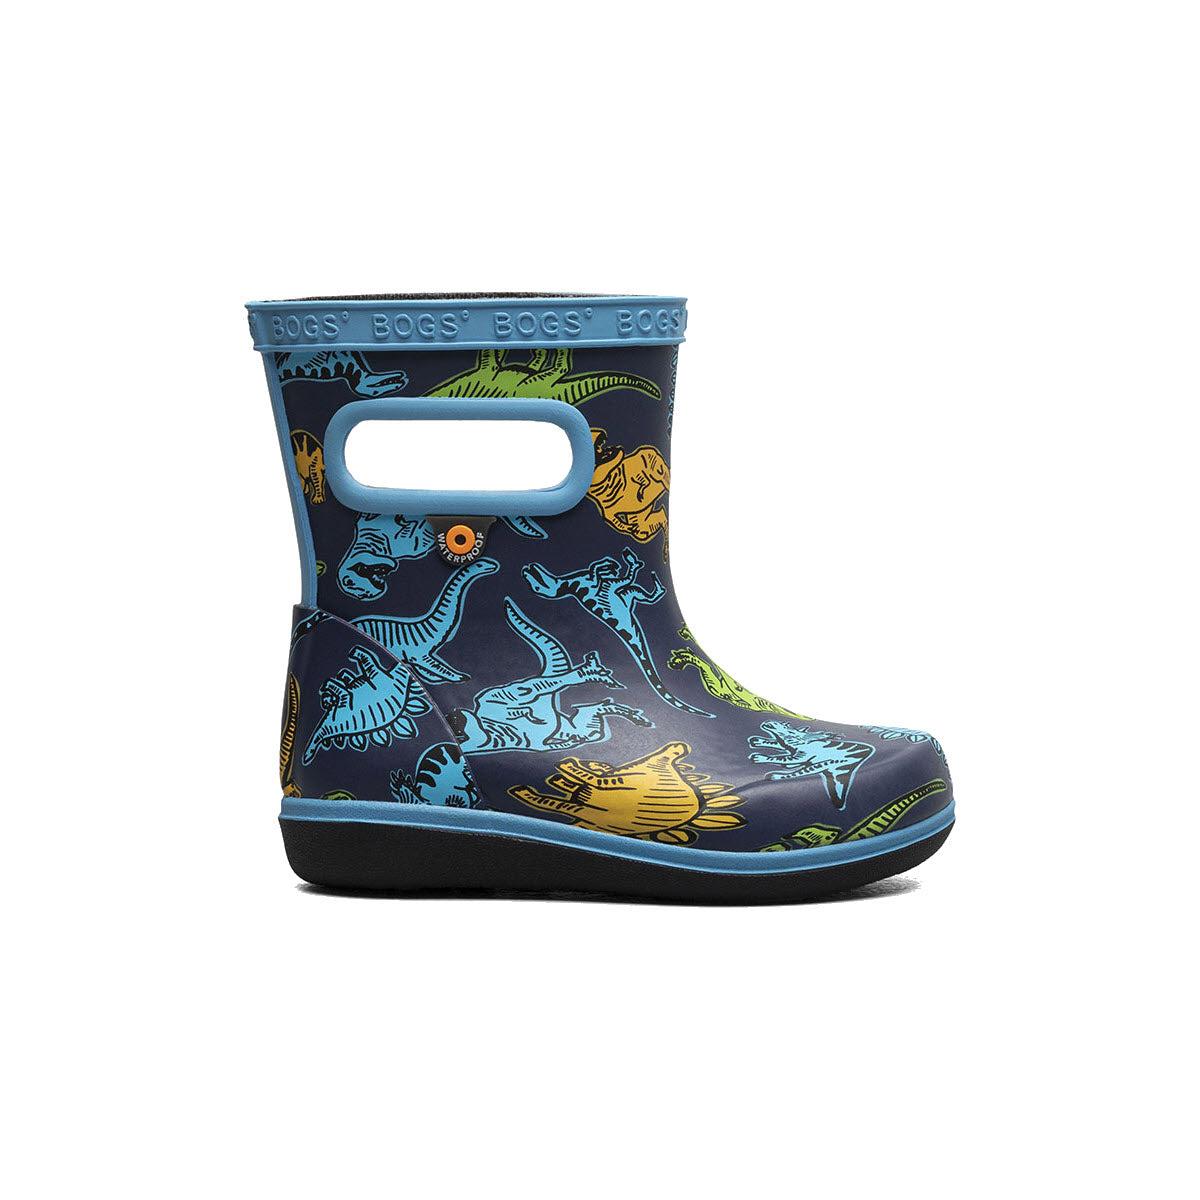 Bogs Kids' waterproof boots with a dinosaur pattern in shades of blue, yellow, and green on a white background.